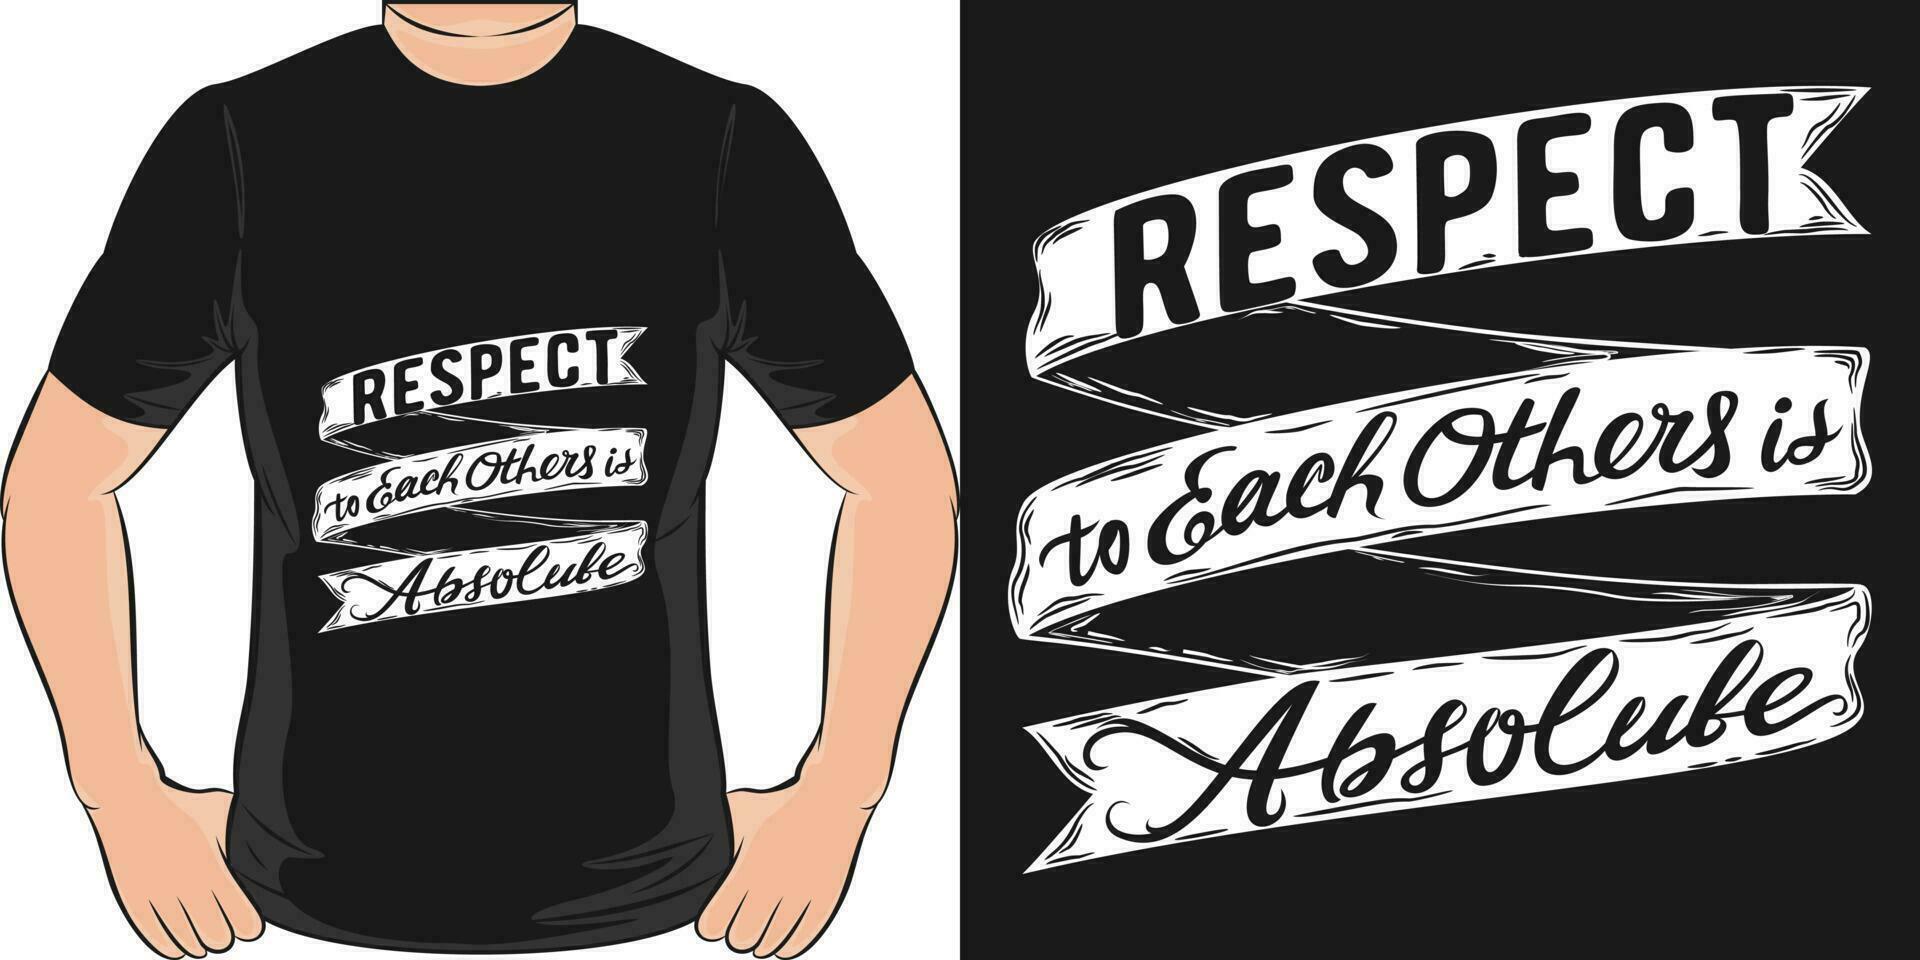 Respect to Each Others is Absolute, Motivational Quote T-Shirt Design. vector